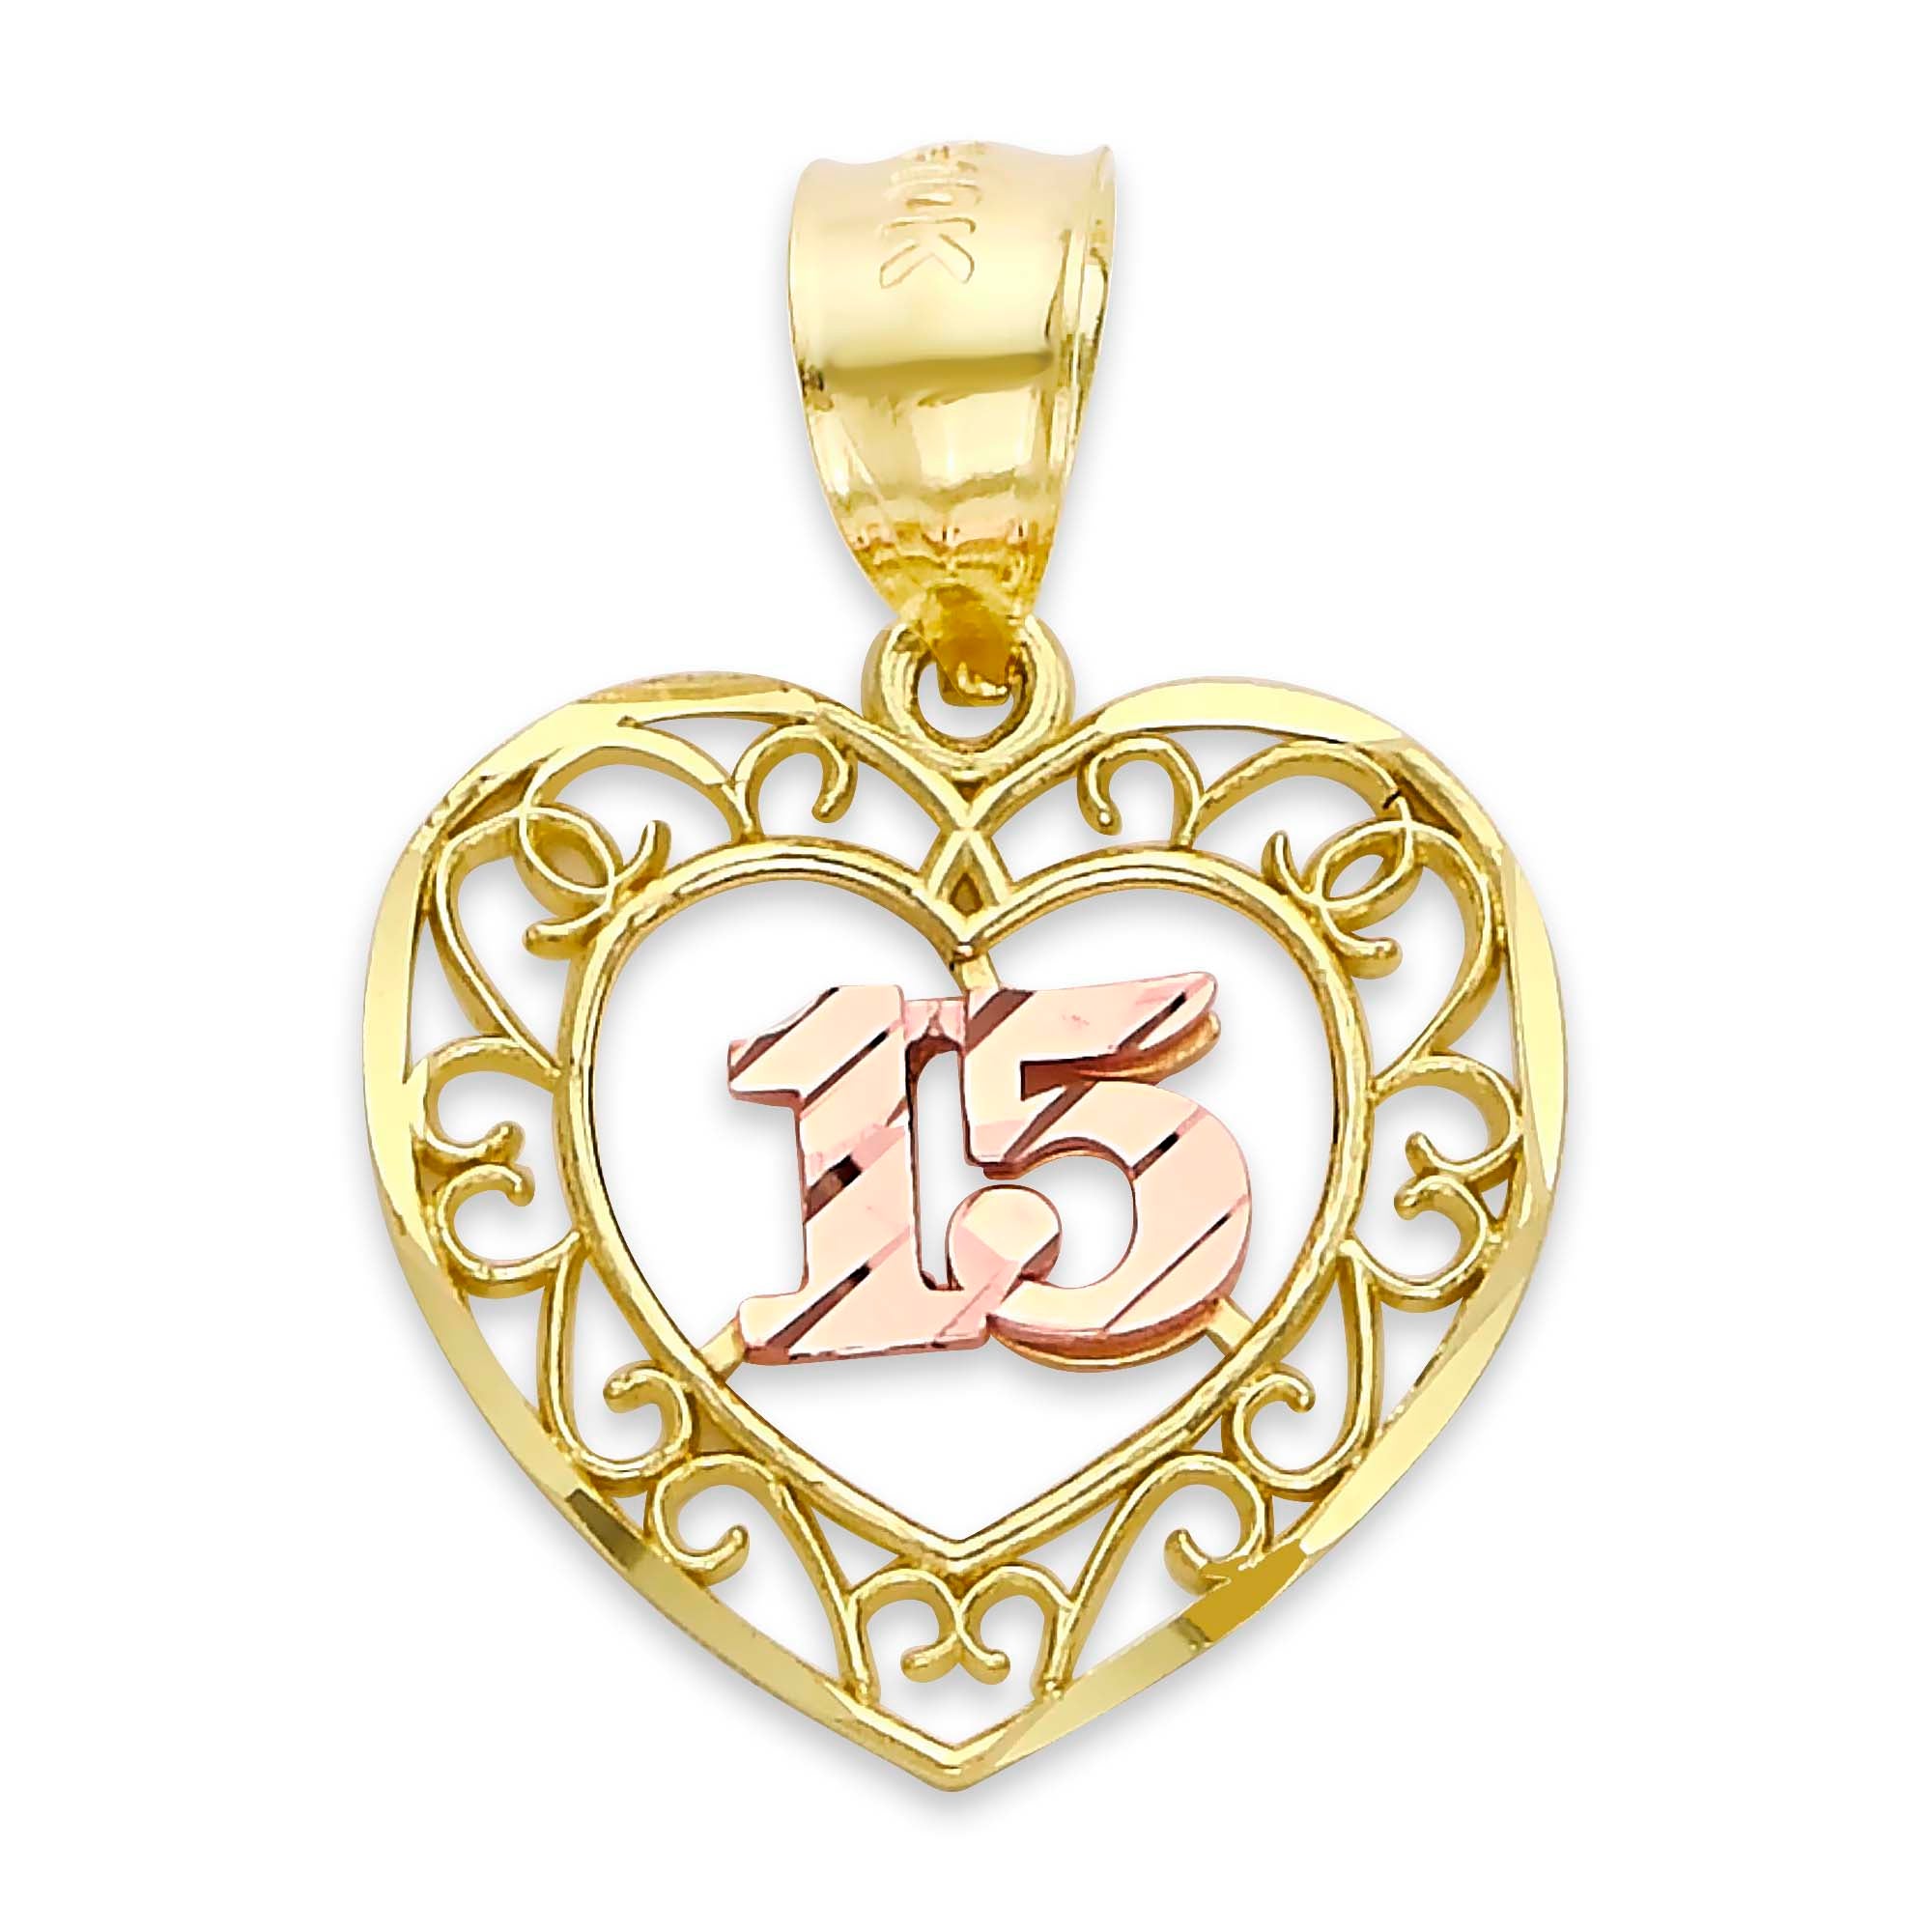 Solid Gold Quinceanera Heart Pendant - 10k or 14k